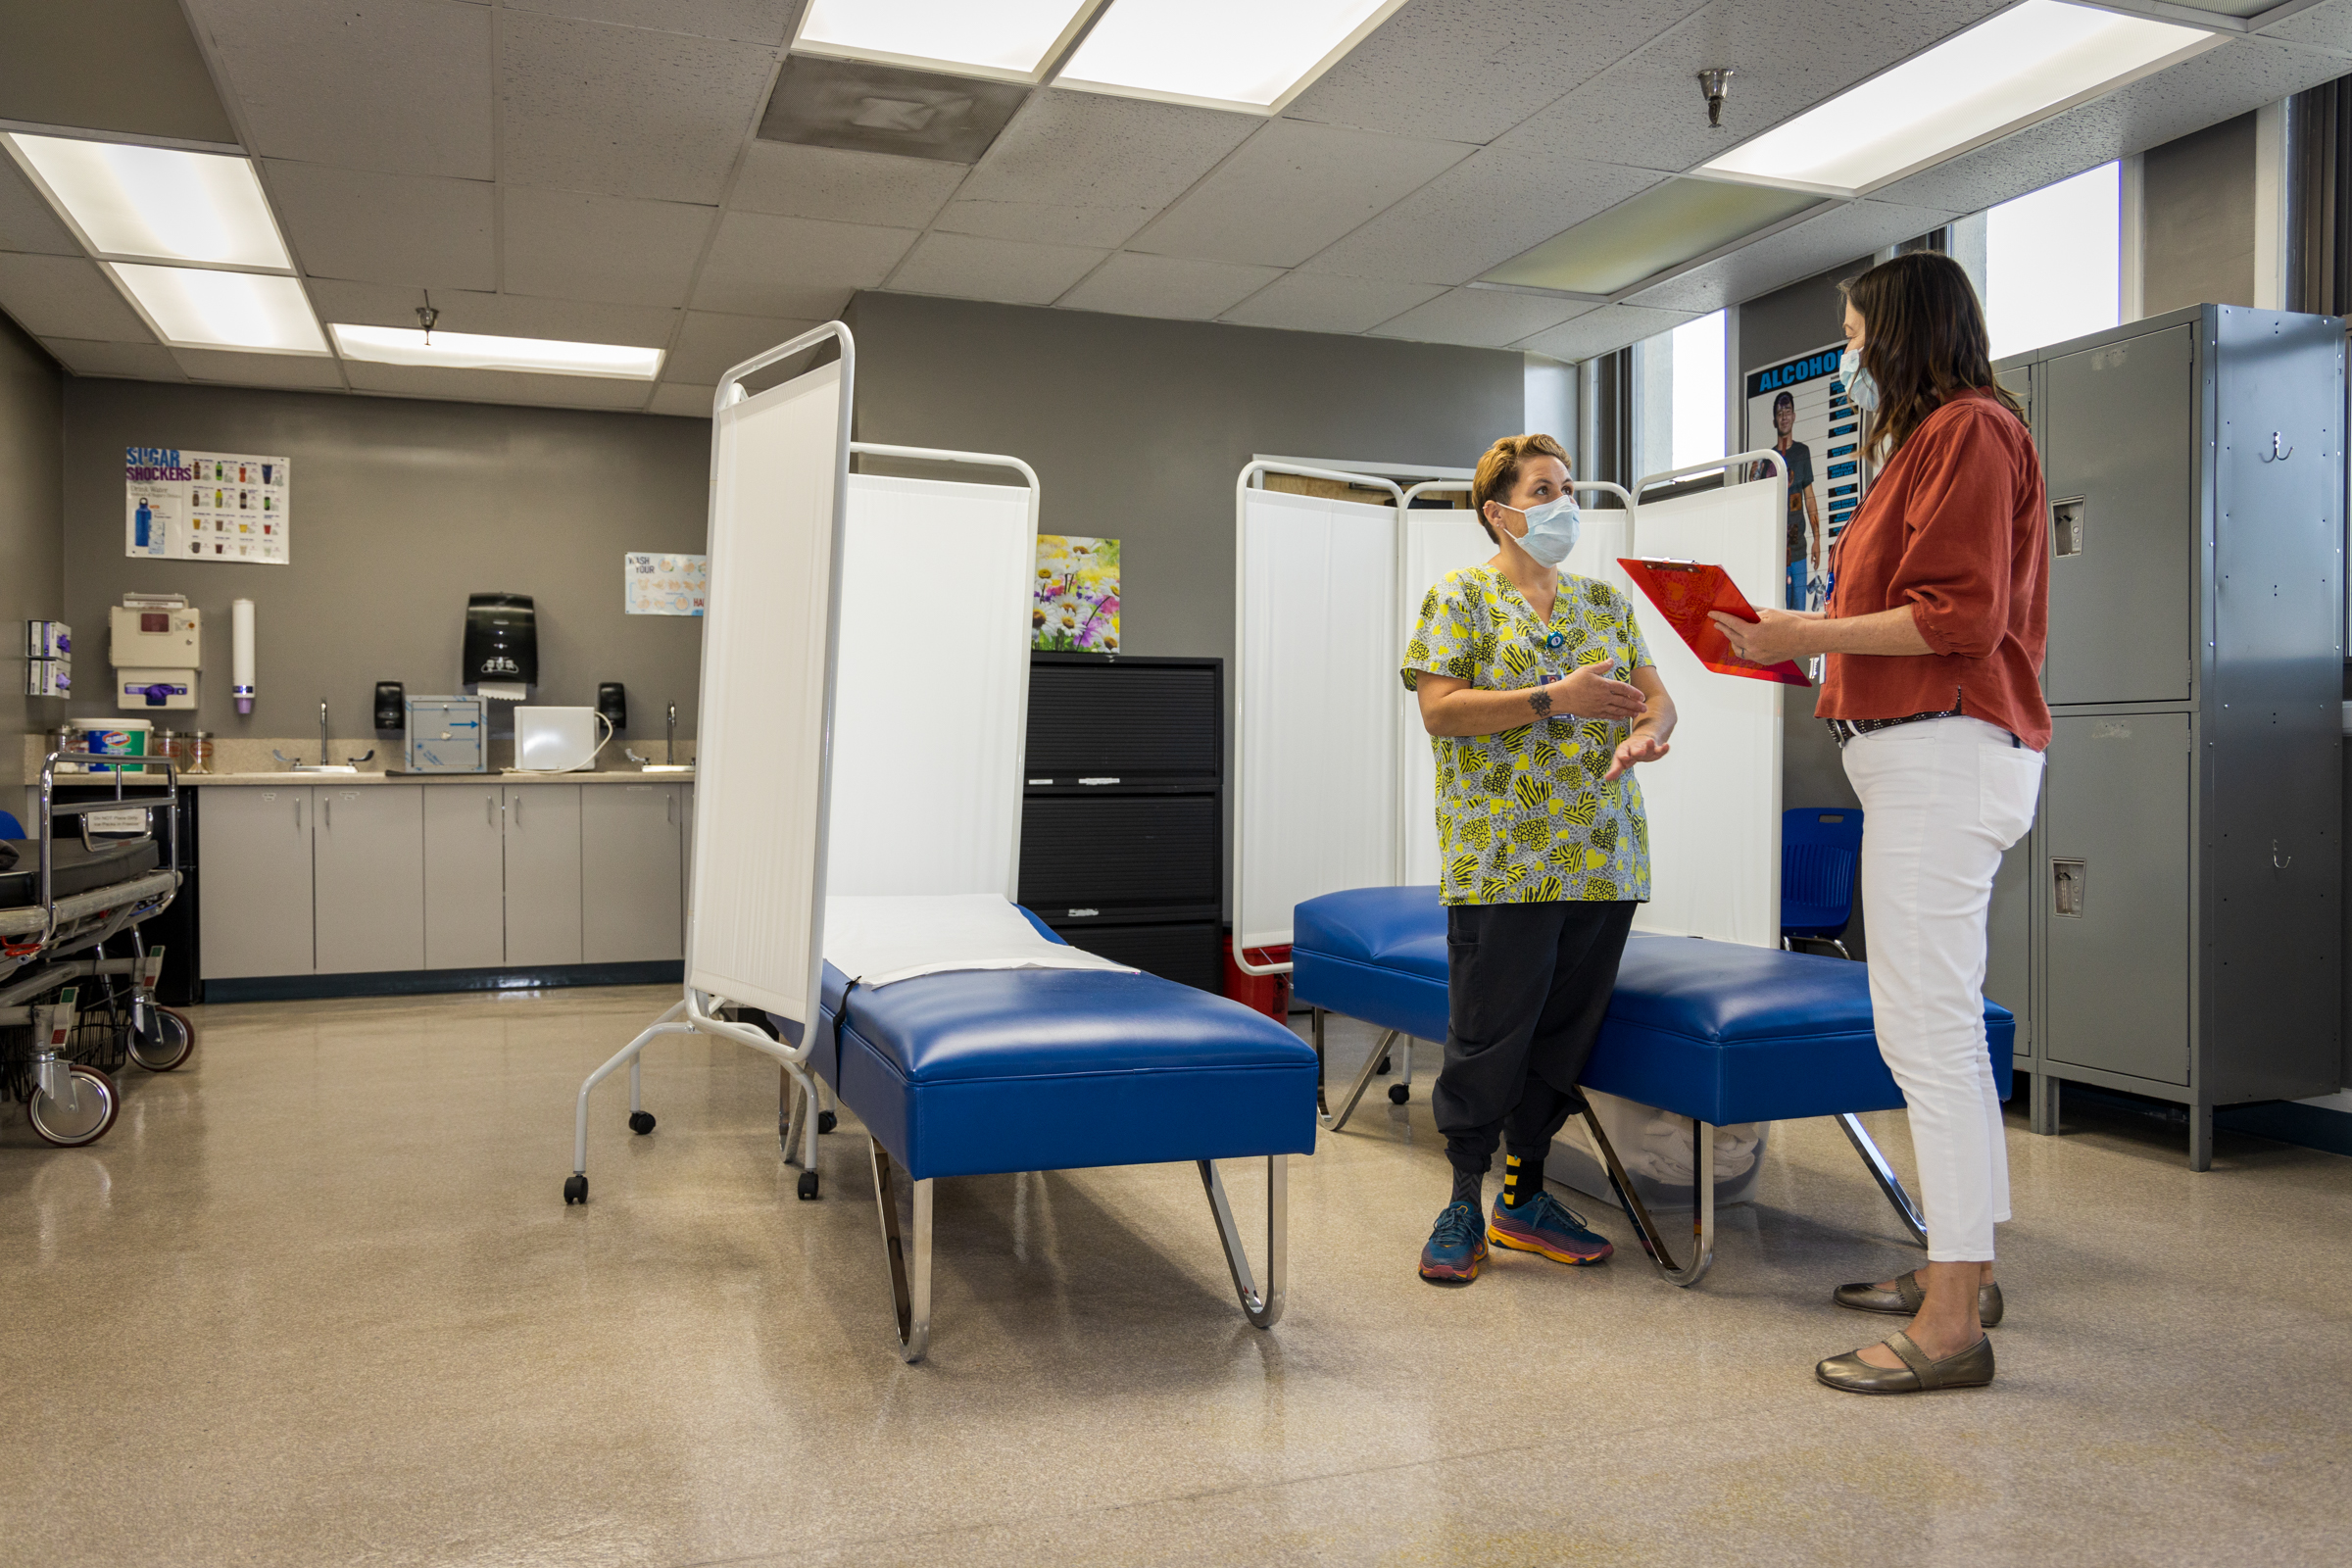 Nurse Practitioner Colleen McEvoy (r) runs through an upcoming appointment with Medical Assistant Brandy Park. Photo by Barbara Laughon/NIHD